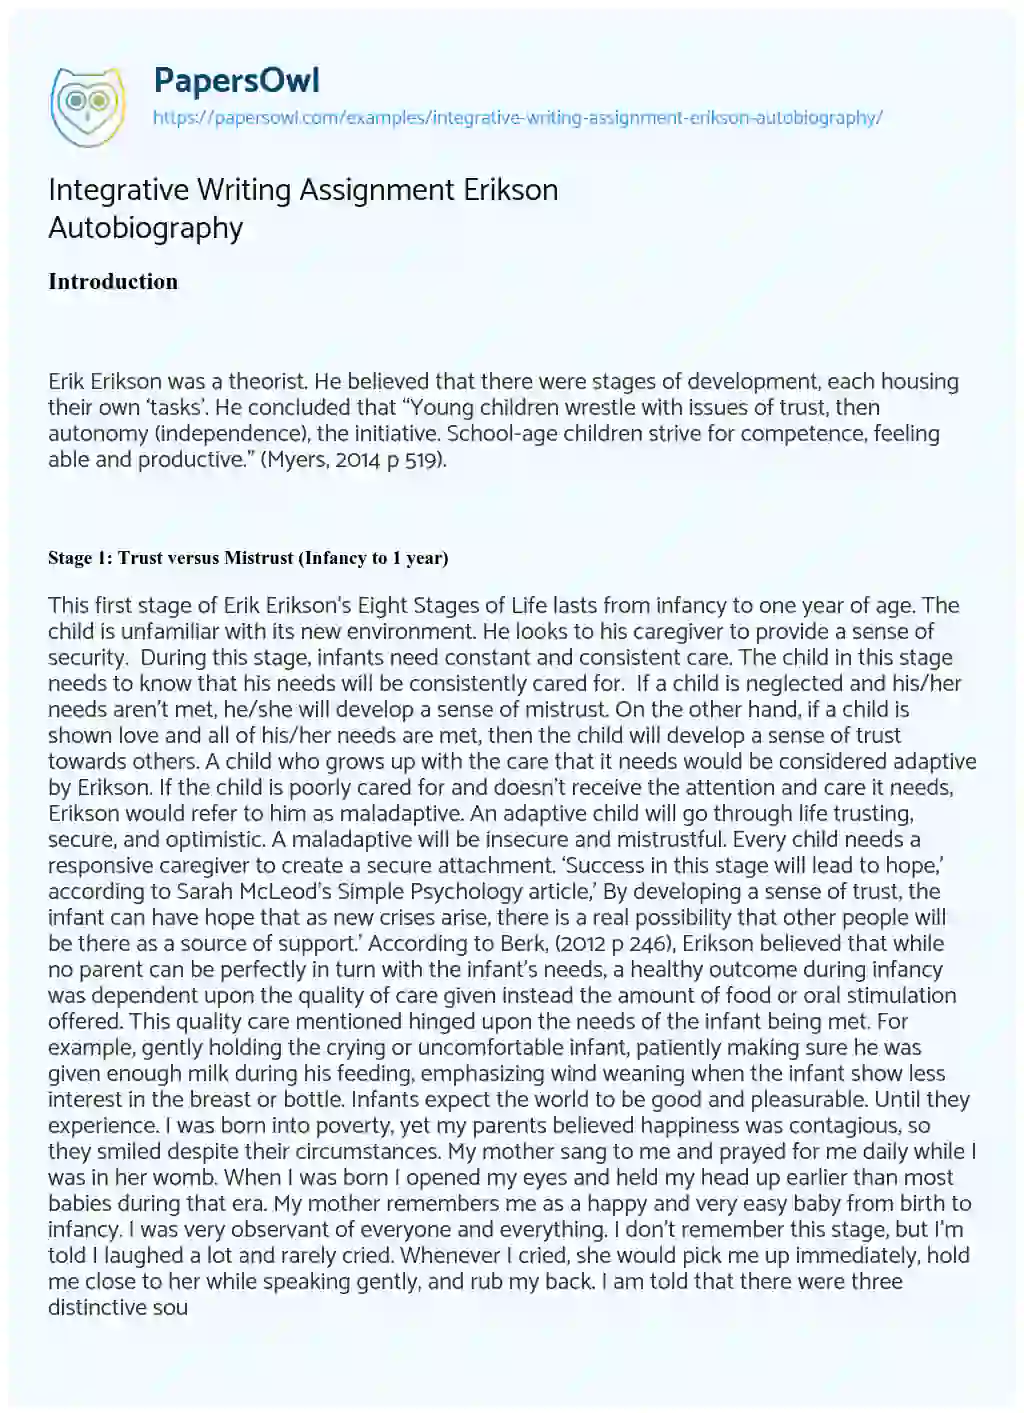 Essay on Integrative Writing Assignment Erikson Autobiography